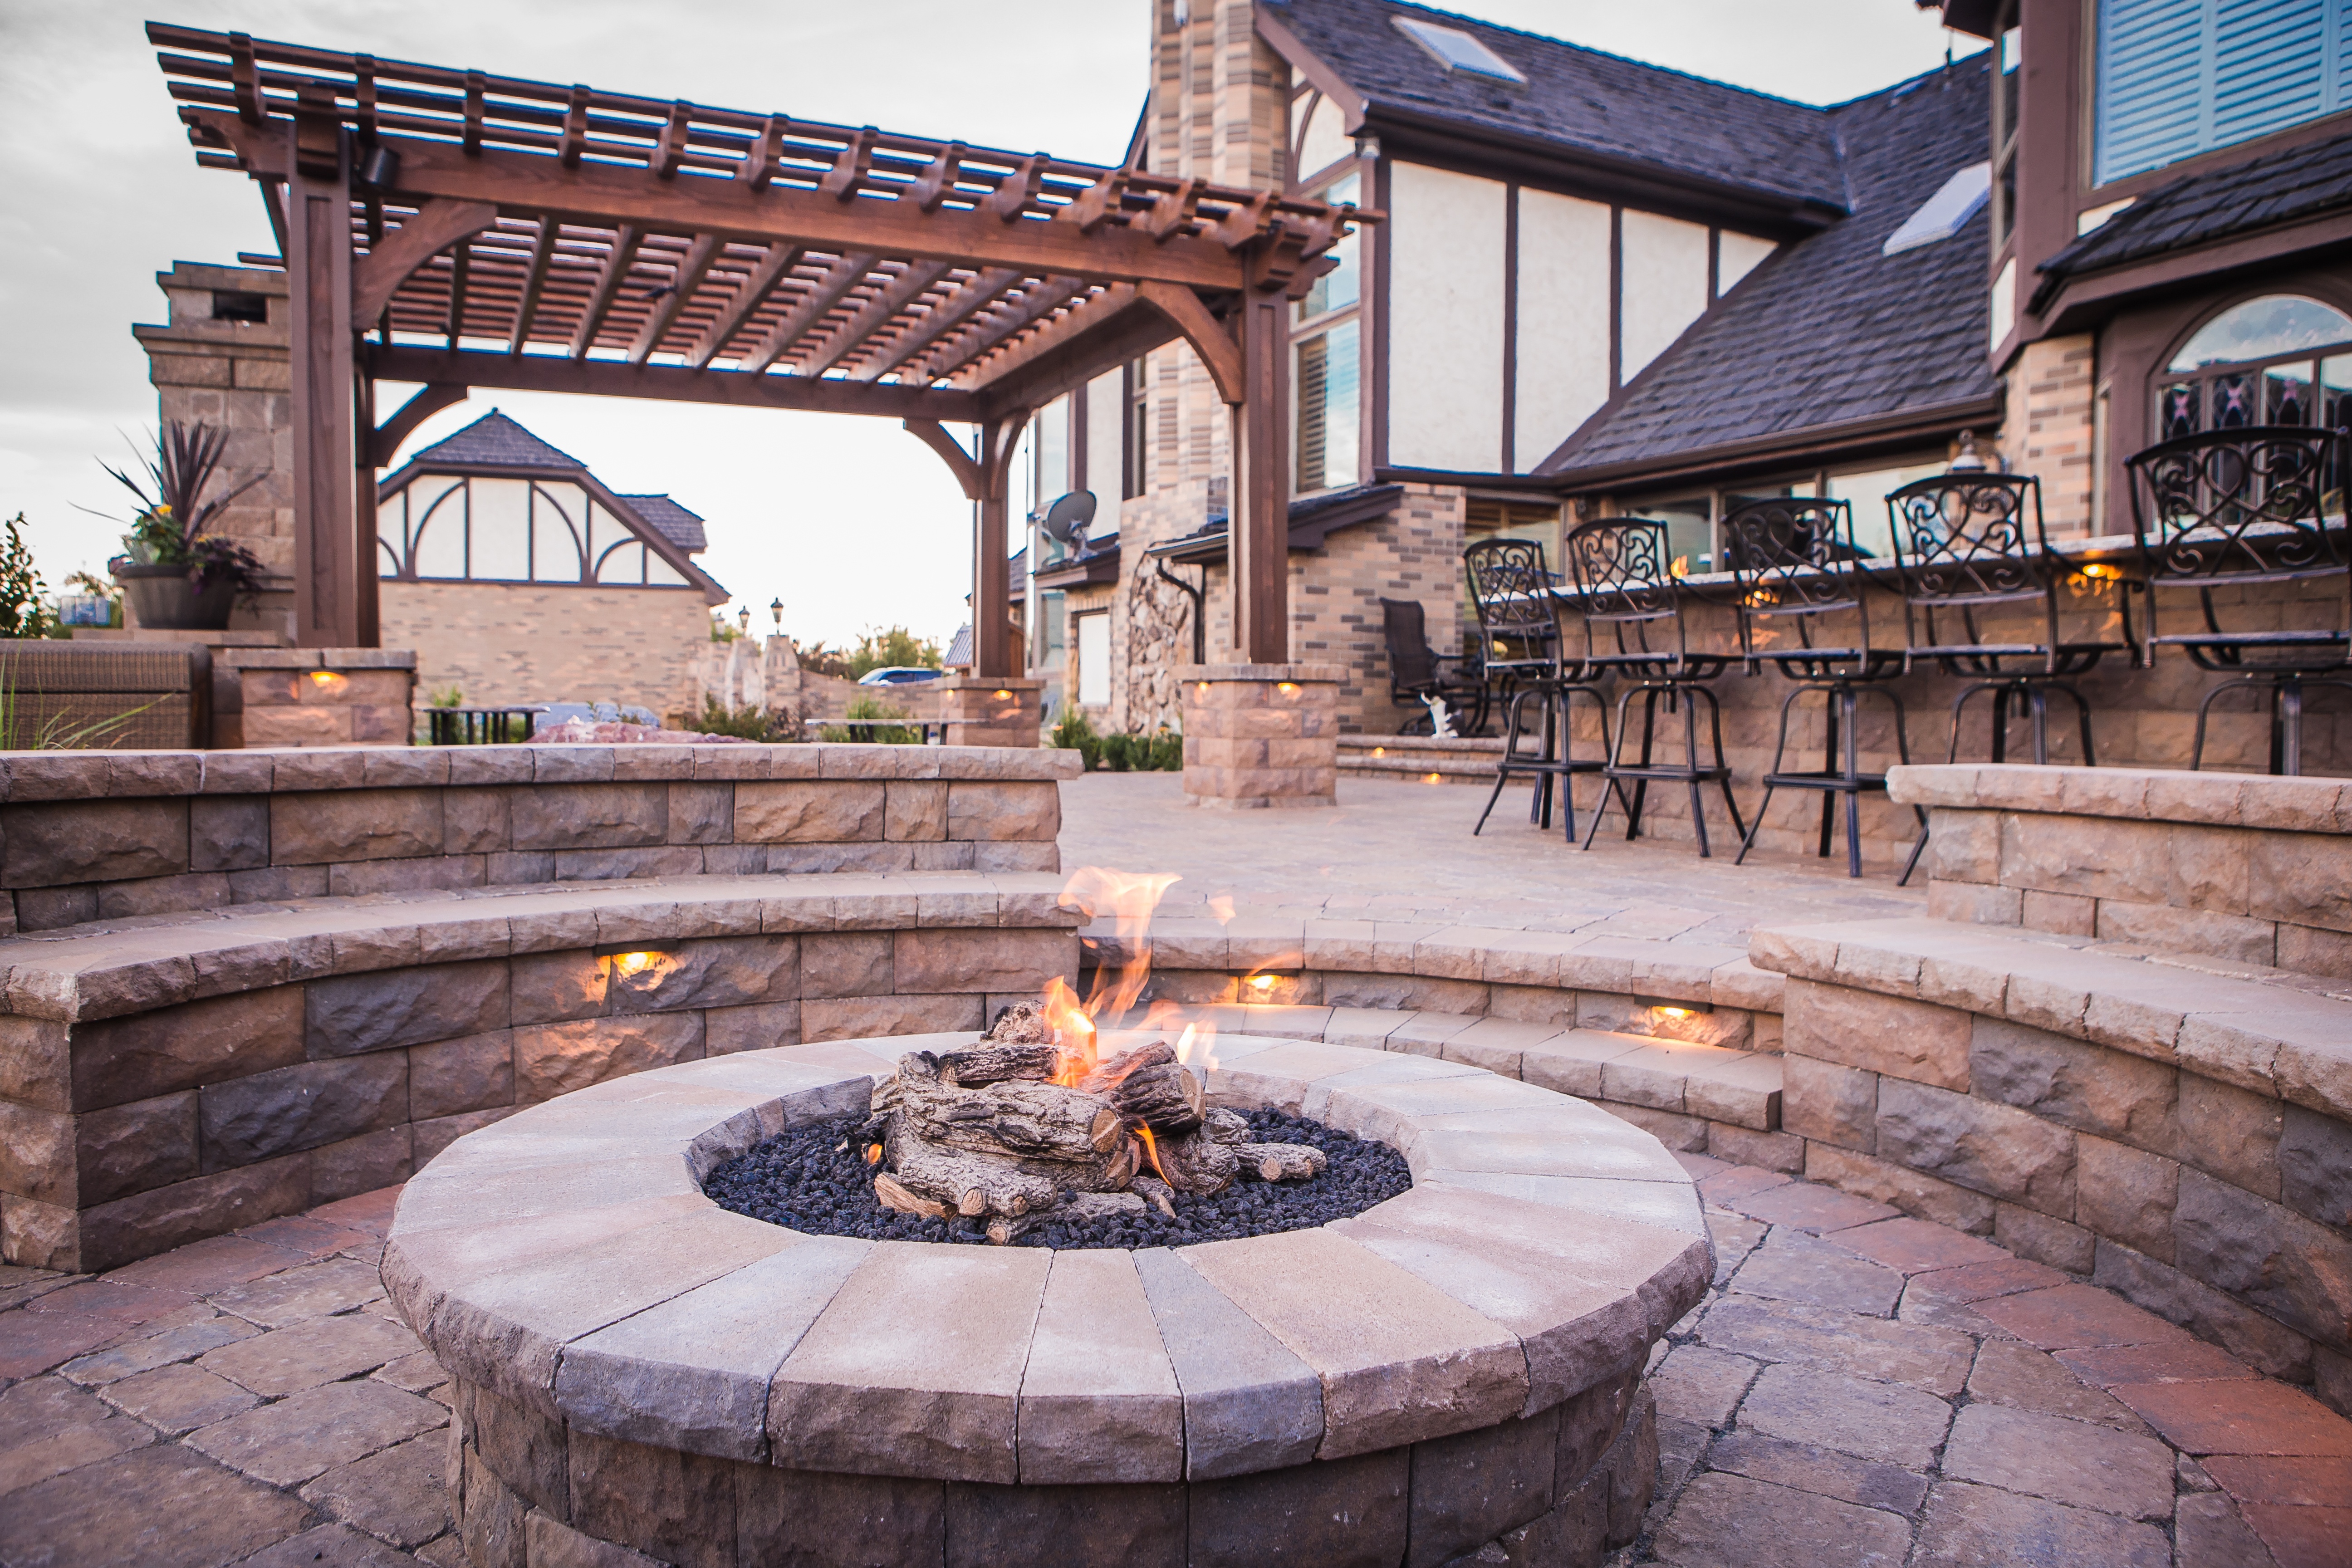 Backyard Fire Pits The Ultimate Guide, How Far Should Propane Fire Pit Be From House